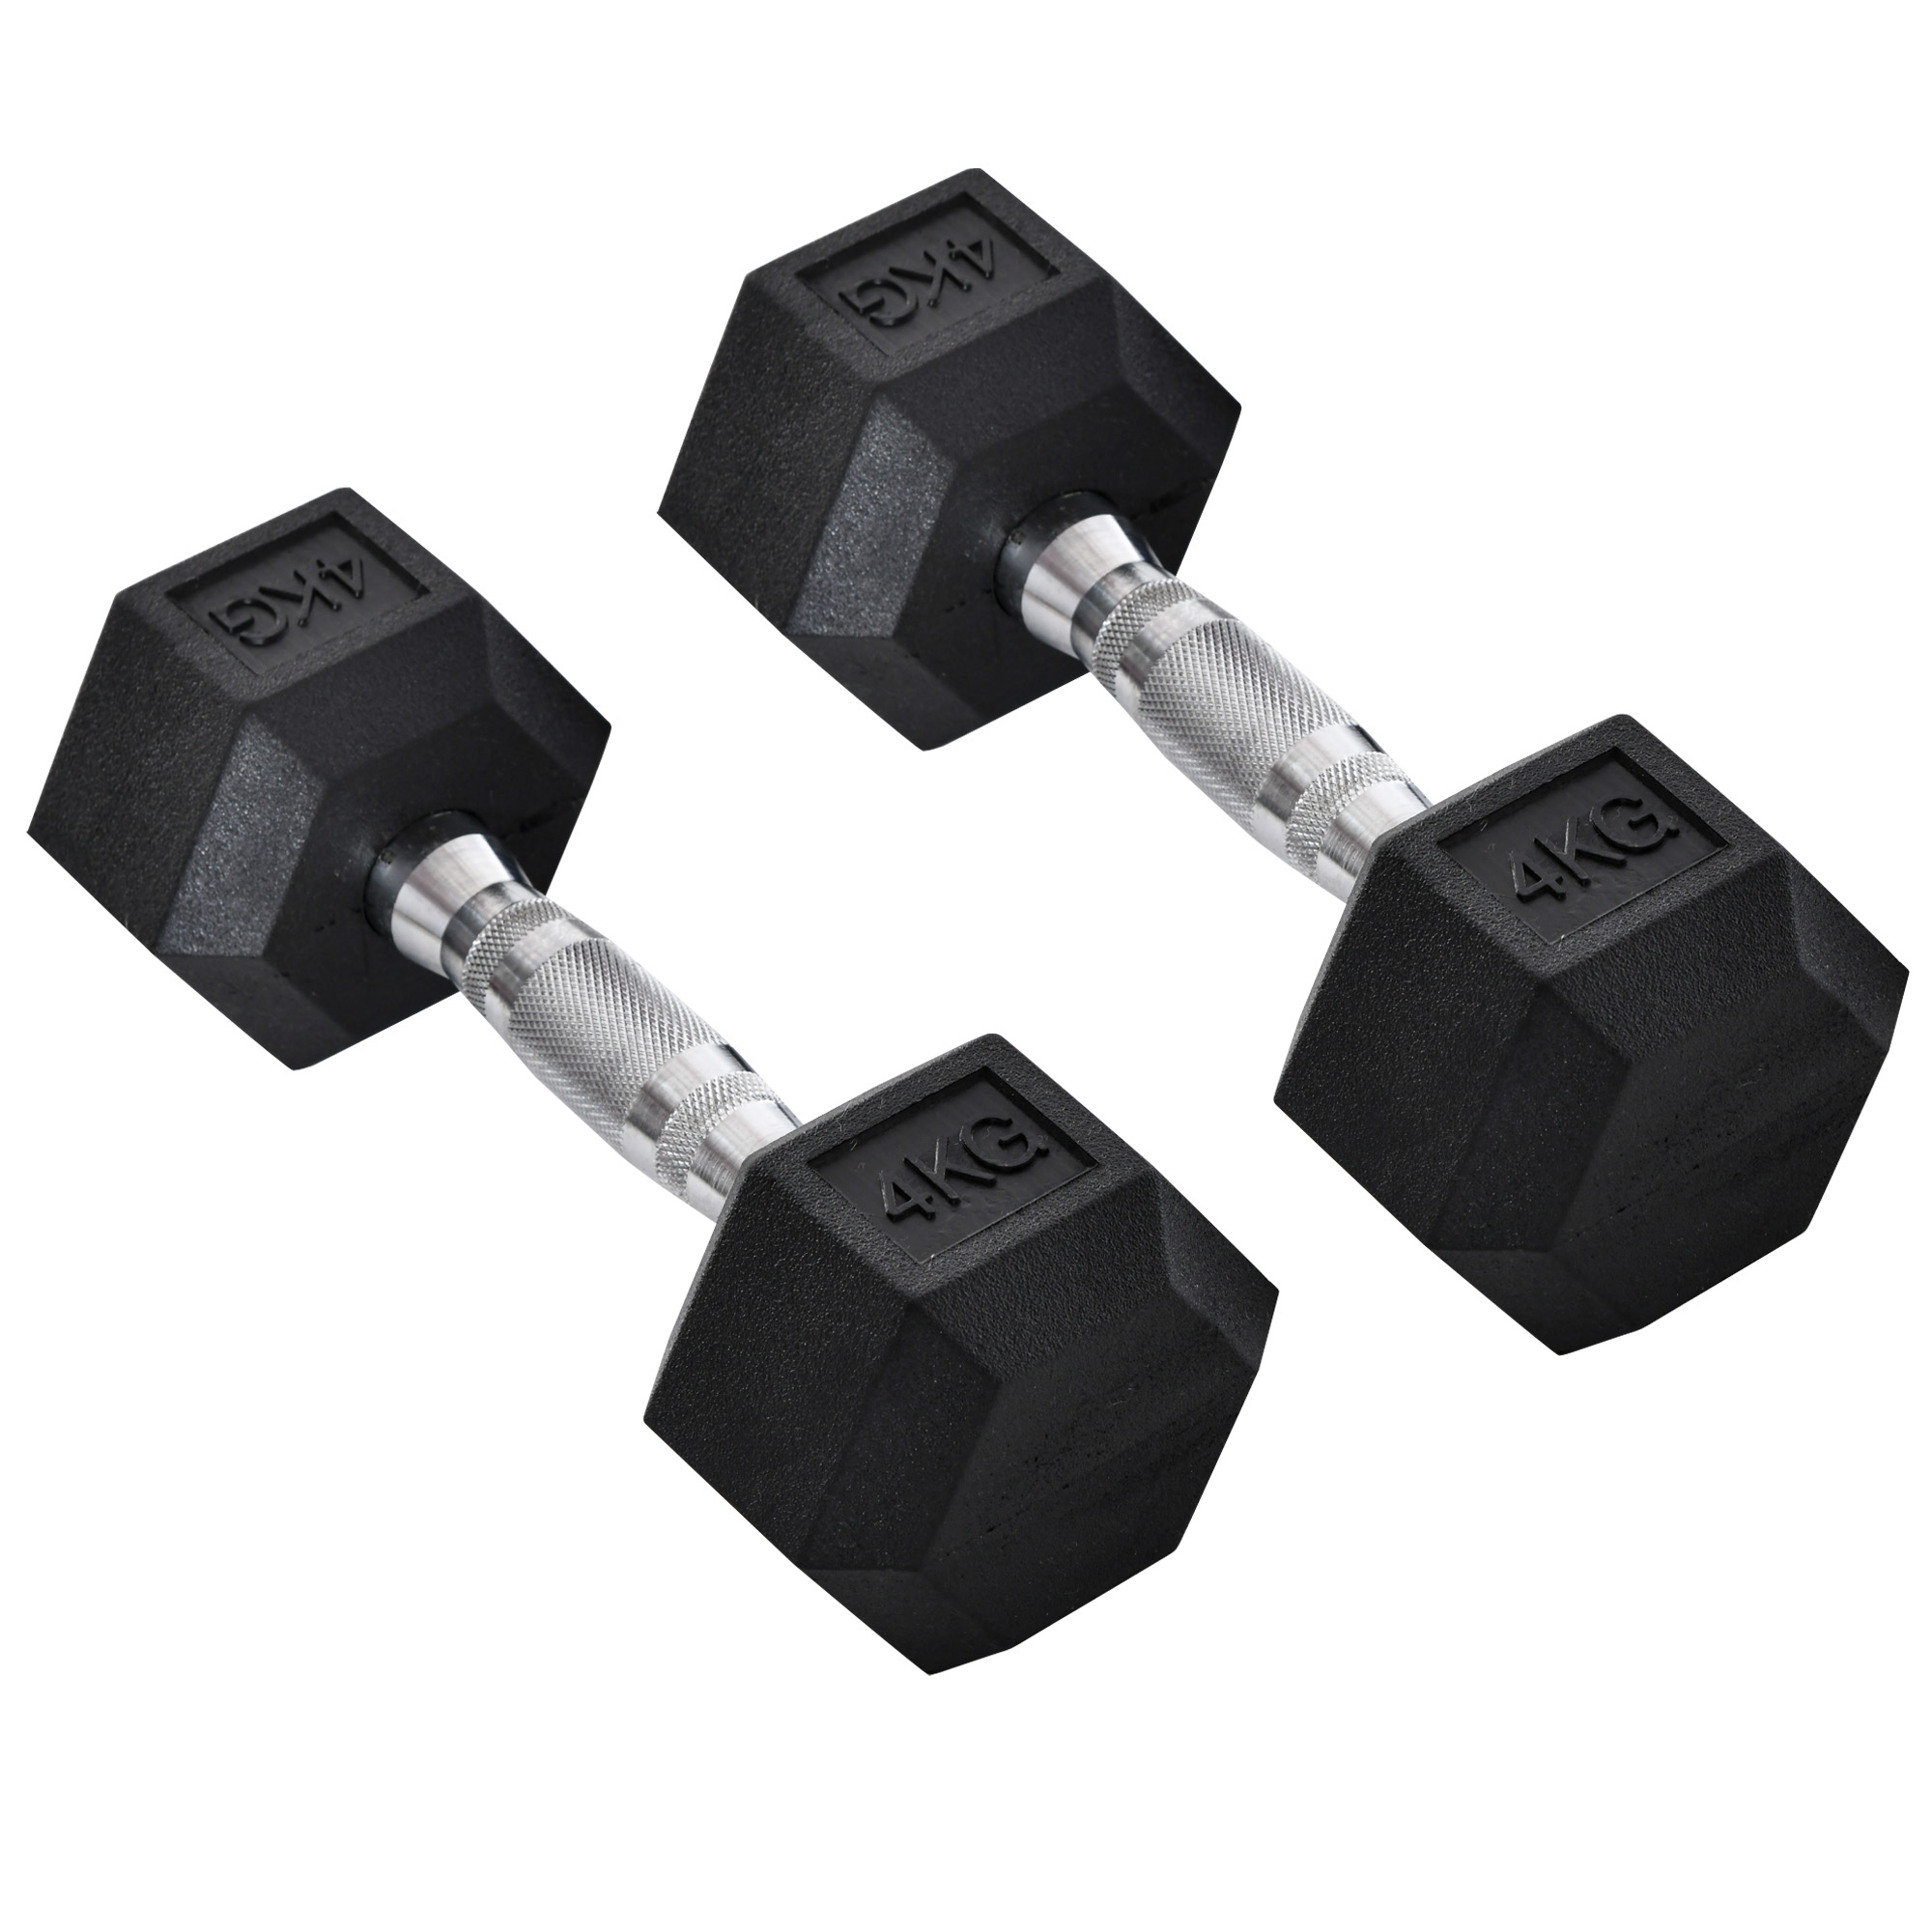 Homcom 2x4kg Rubber Dumbbell Sports Hex Weights Sets Home Gym Fitness Hexagonal Dumbbells Kit Weight Lifting Exercise